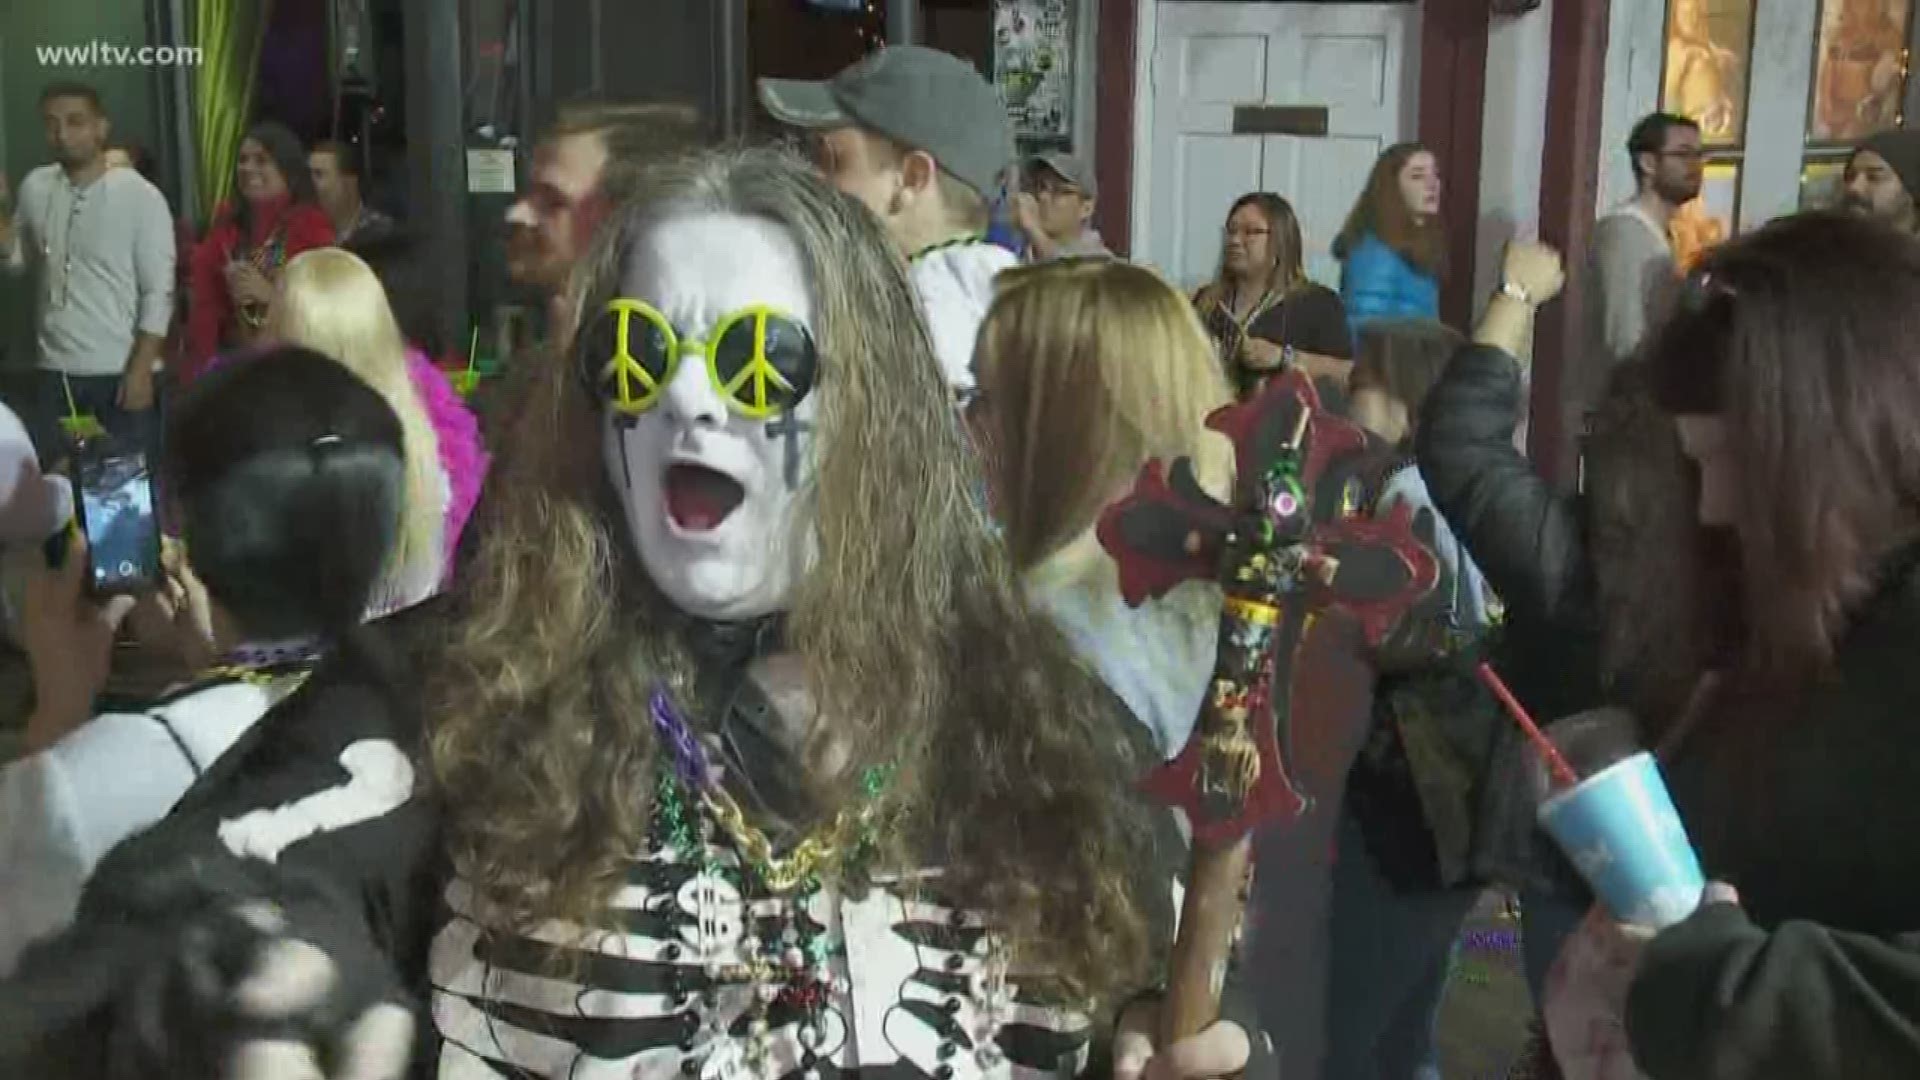 The party in the French Quarter roared all day in the buildup to Tuesday.